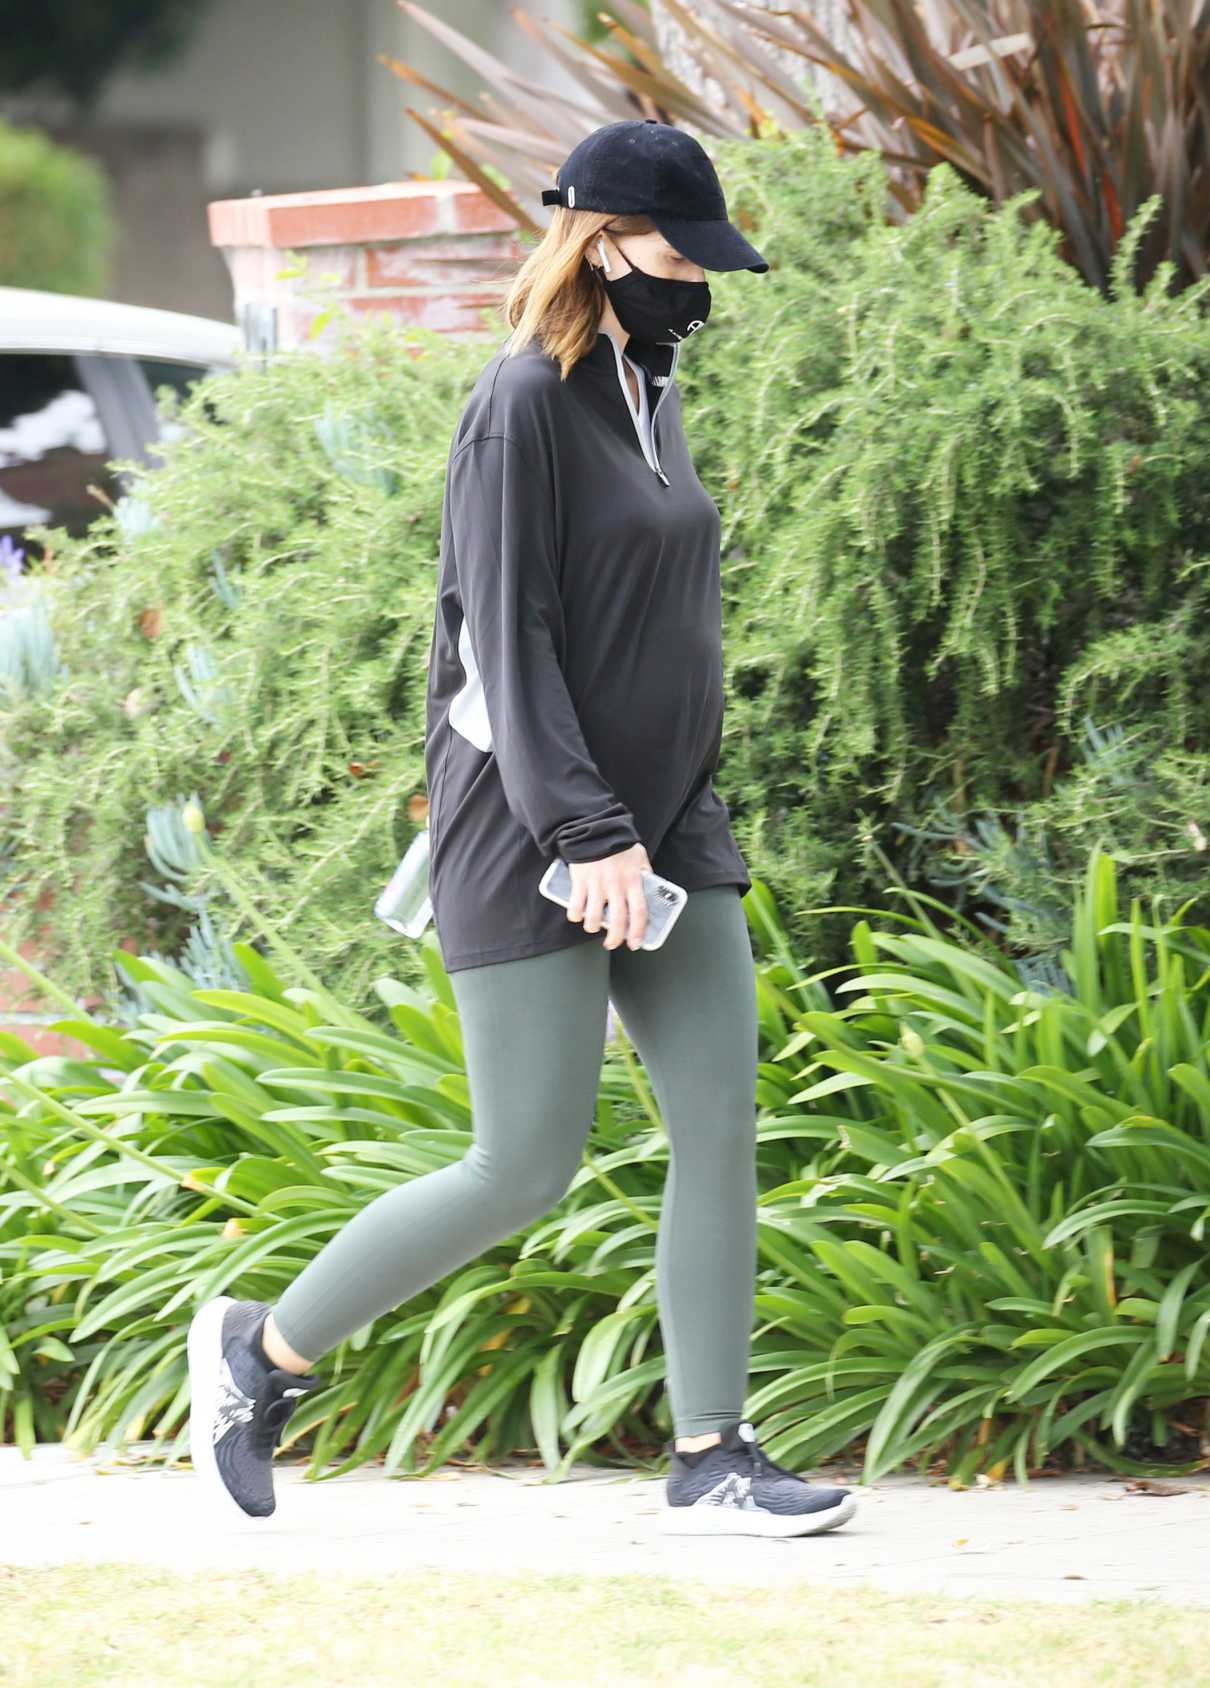 Katherine Schwarzenegger in a Black Cap Heads Out for an Afternoon ...